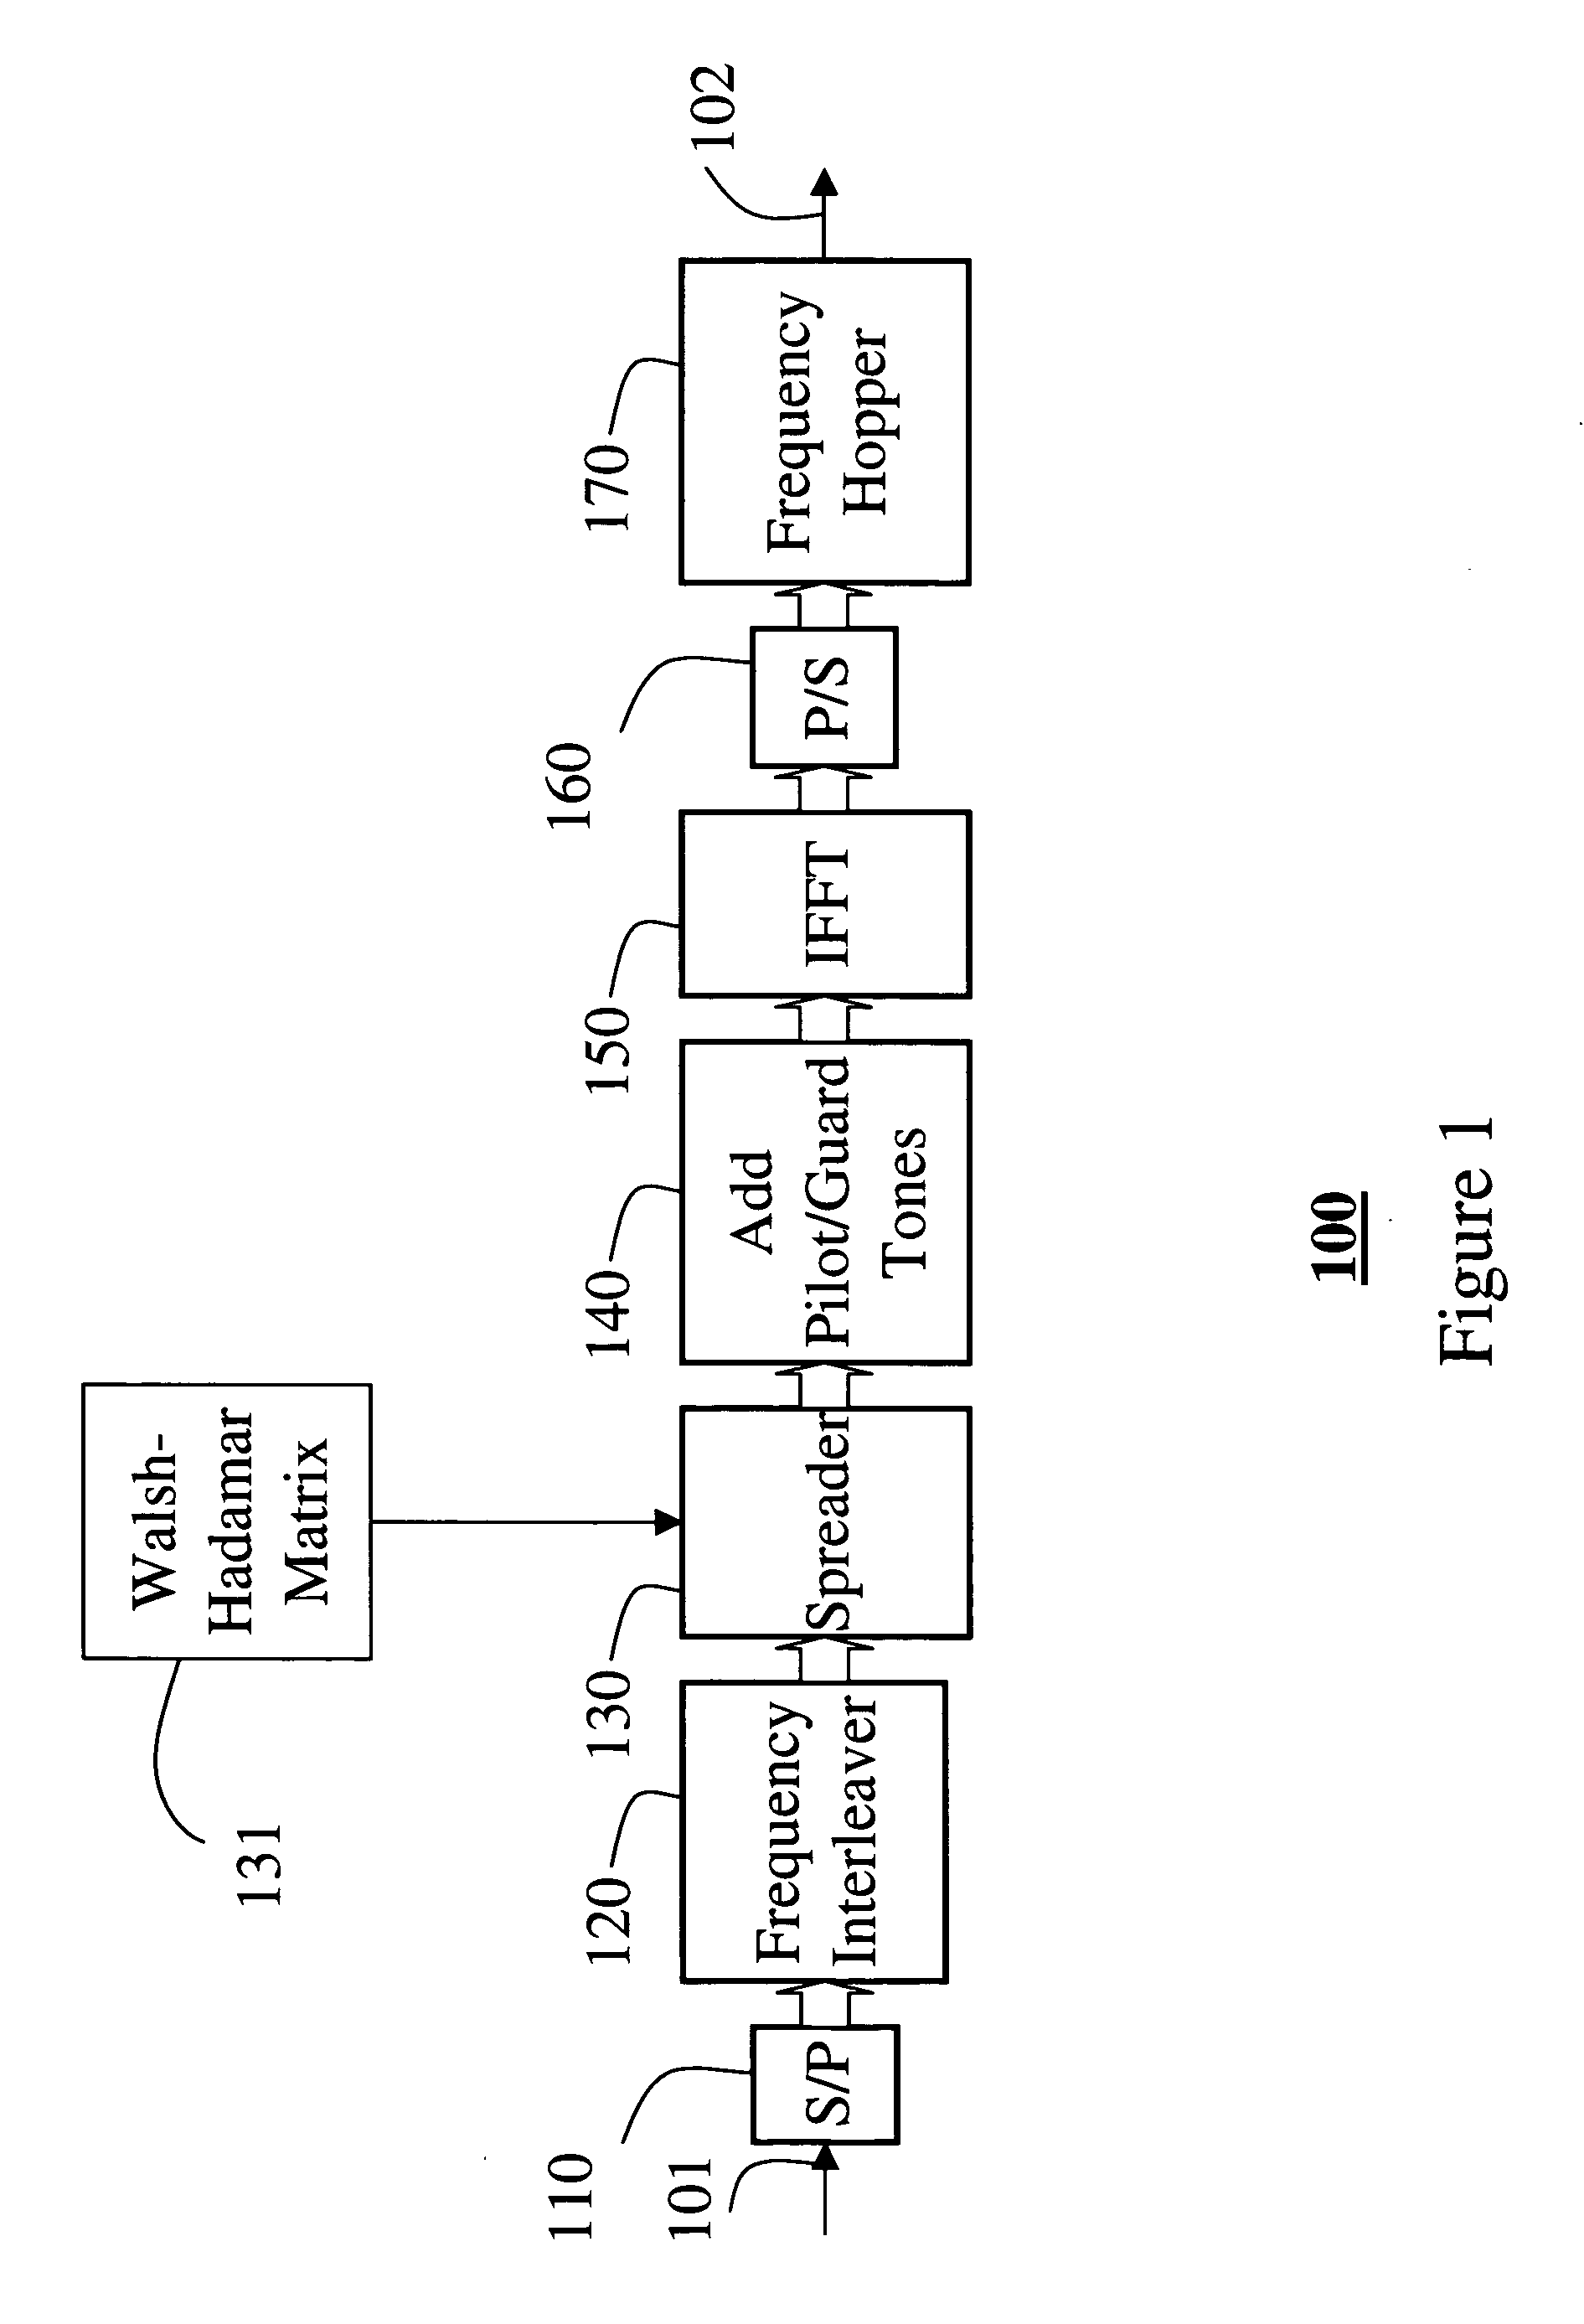 Ultra wide bandwidth transmitter with tone grouping and spreading